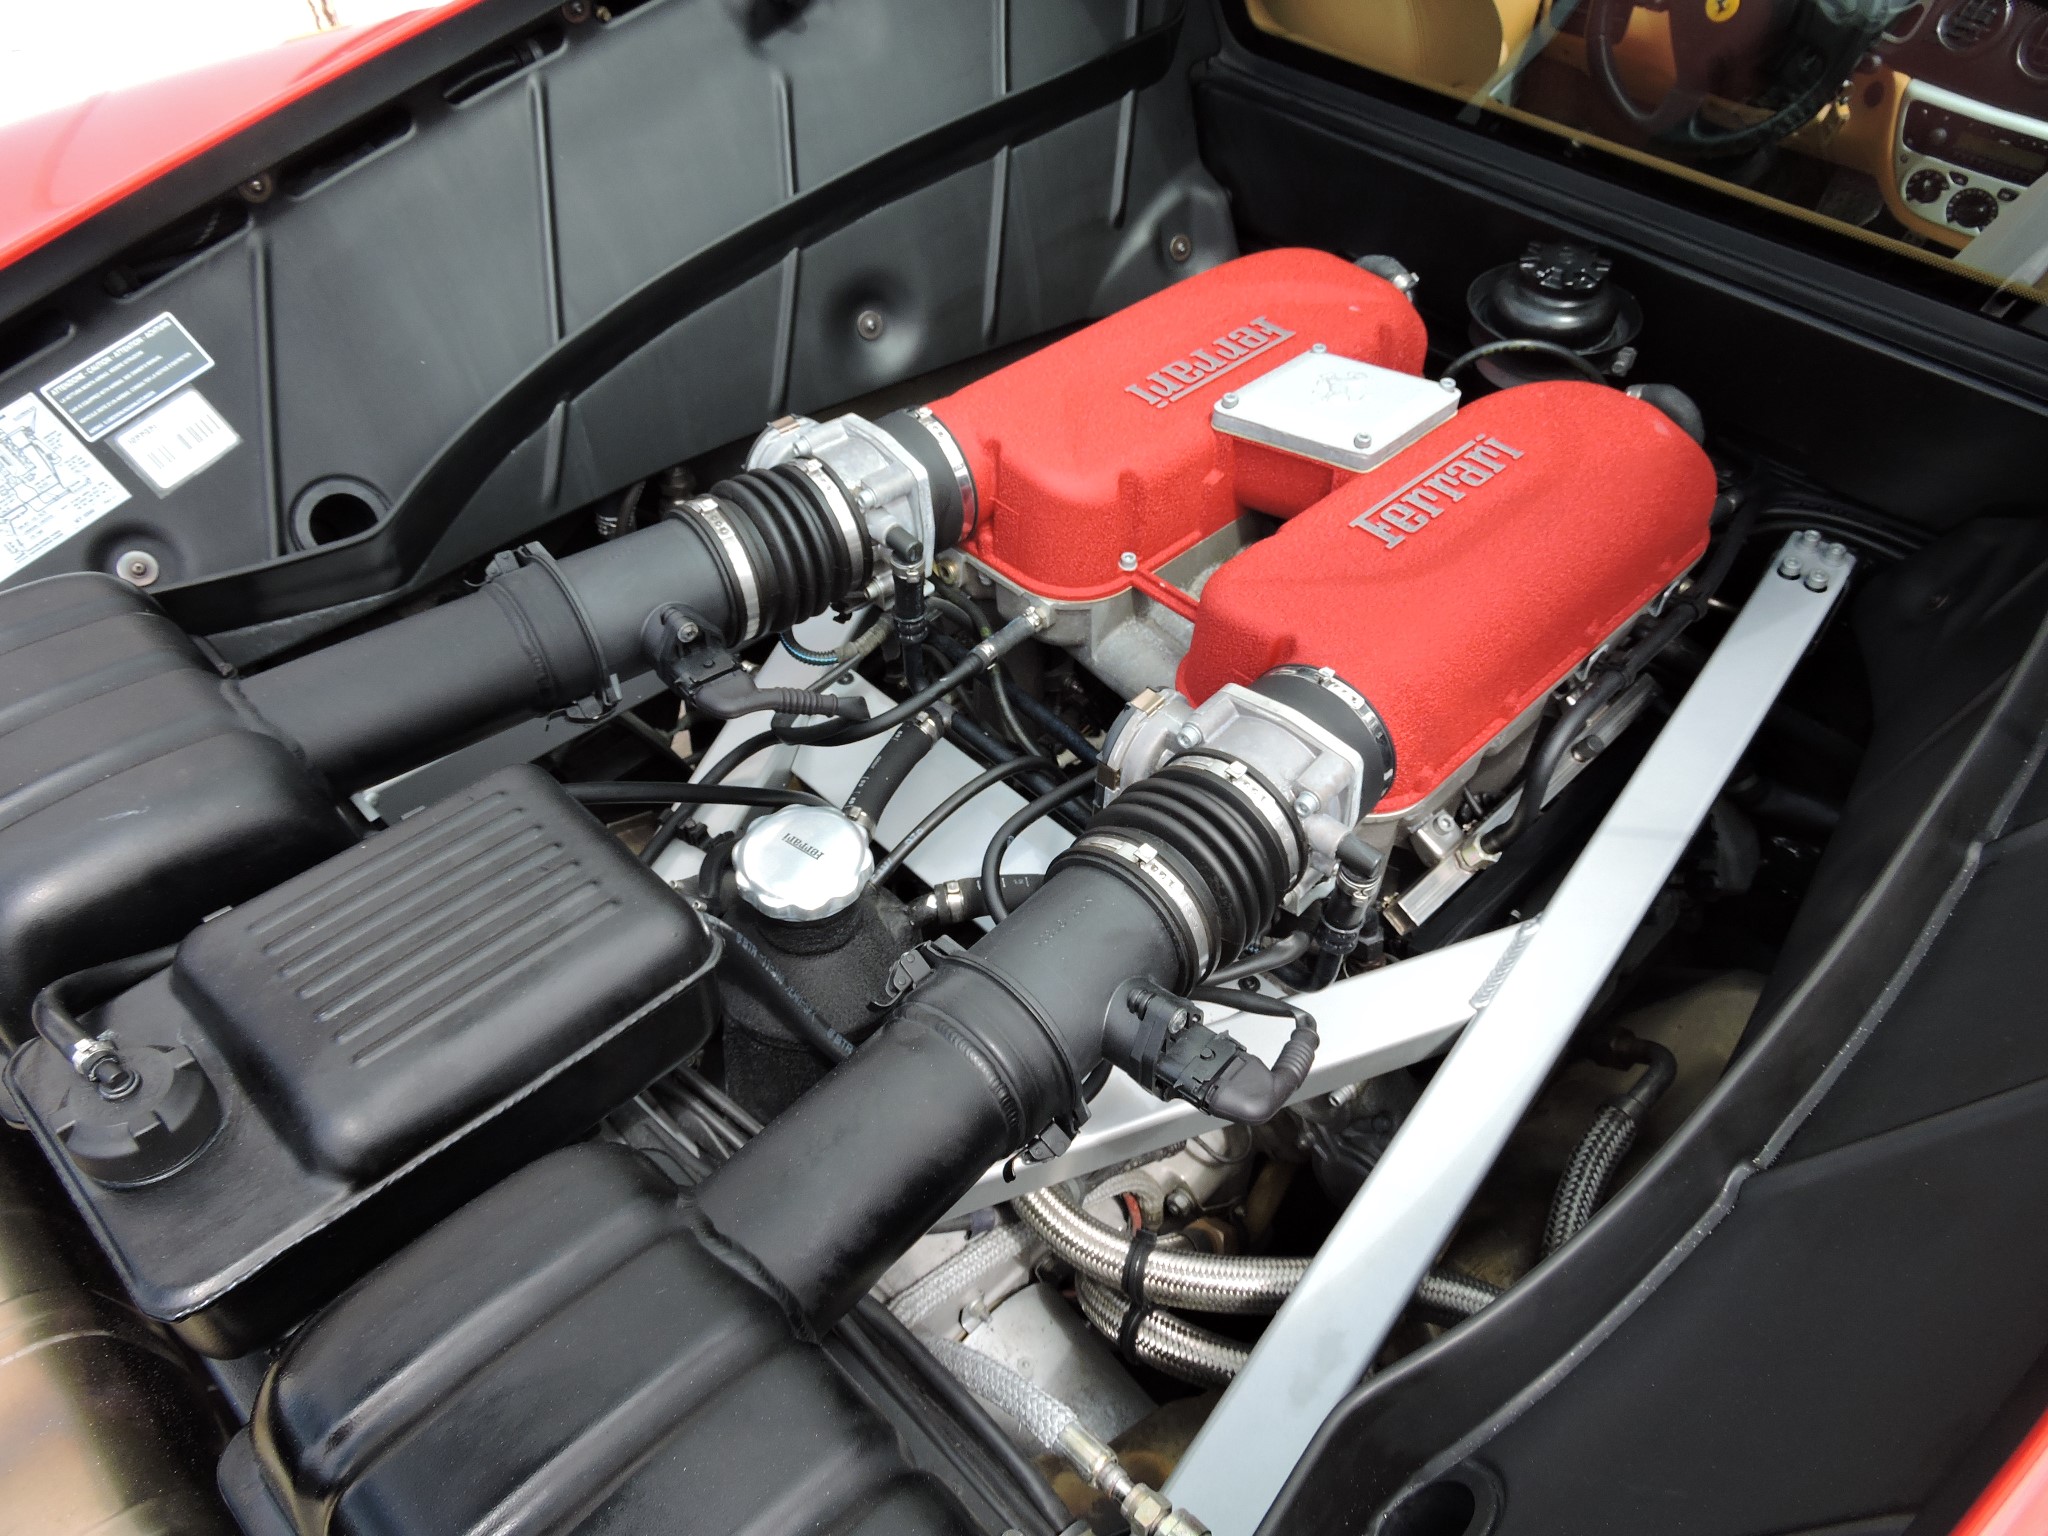 The 3.6 liter V8 engine is a tried and reliable unit producing a more than sufficient 400bhp.